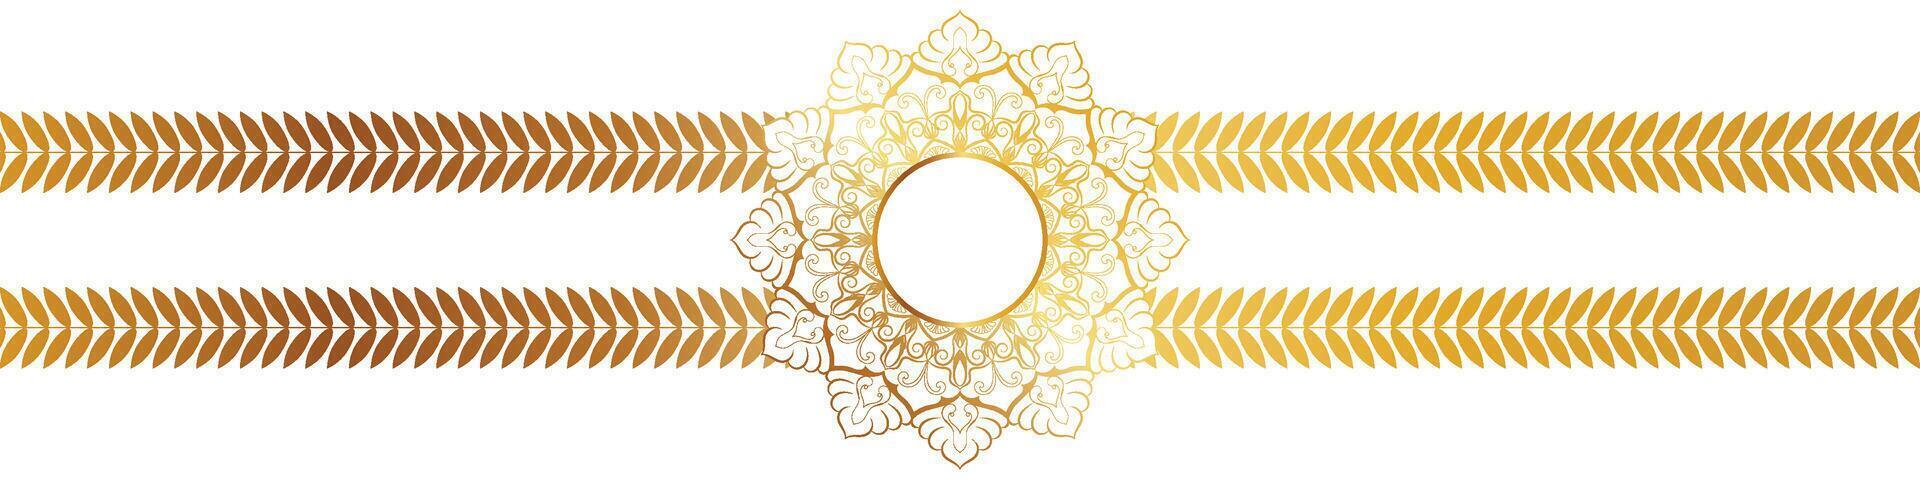 Circle golden mandala pattern for decorating married couple wedding cards. vector